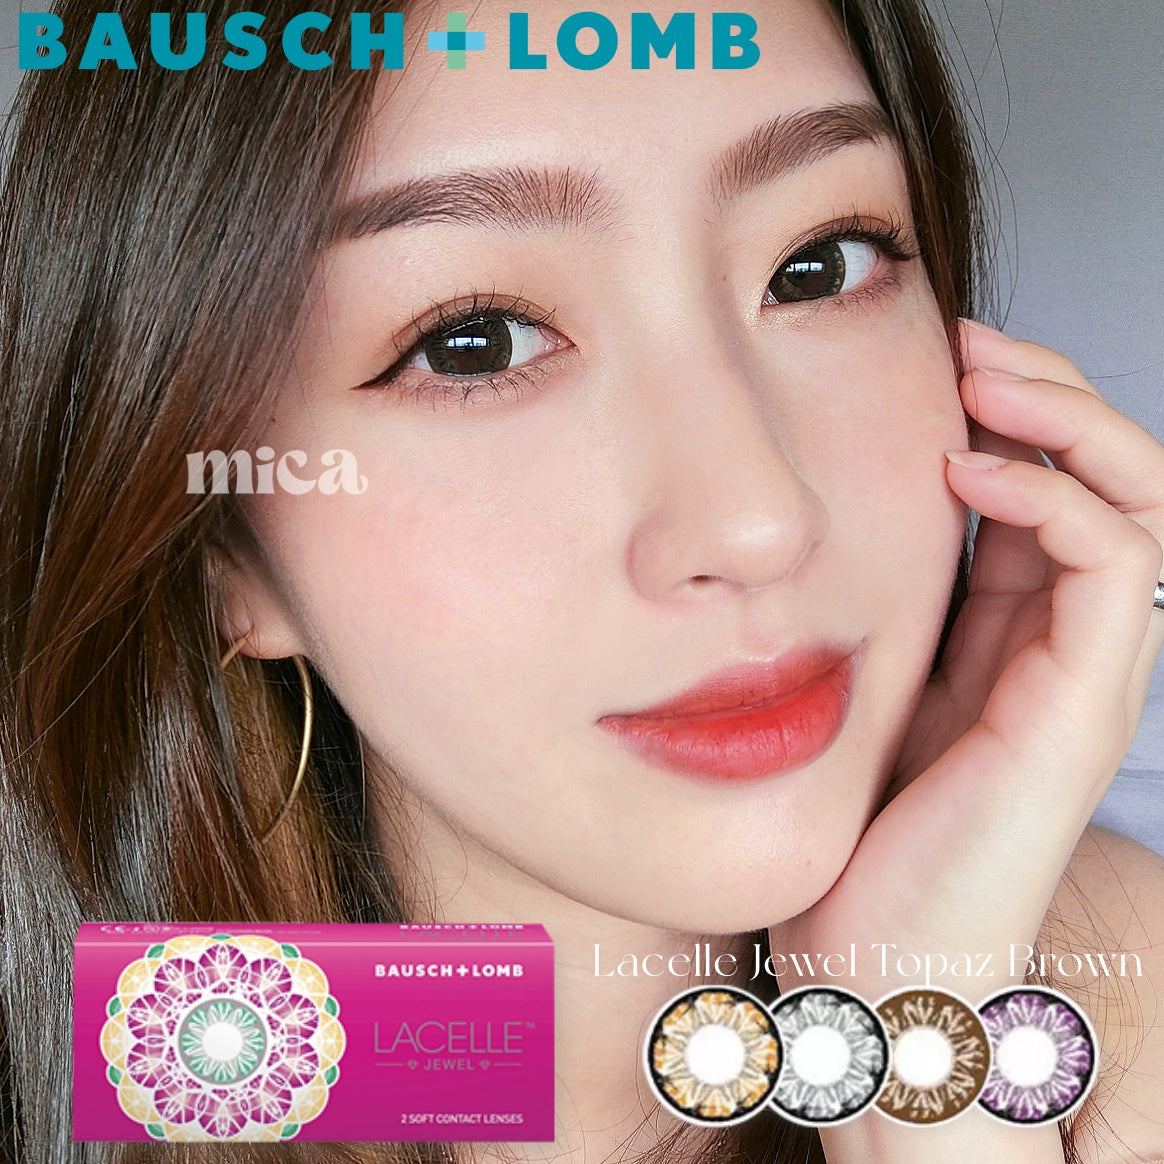 Bausch & Lomb Lacelle Jewel Topaz Brown 0-800 *25step